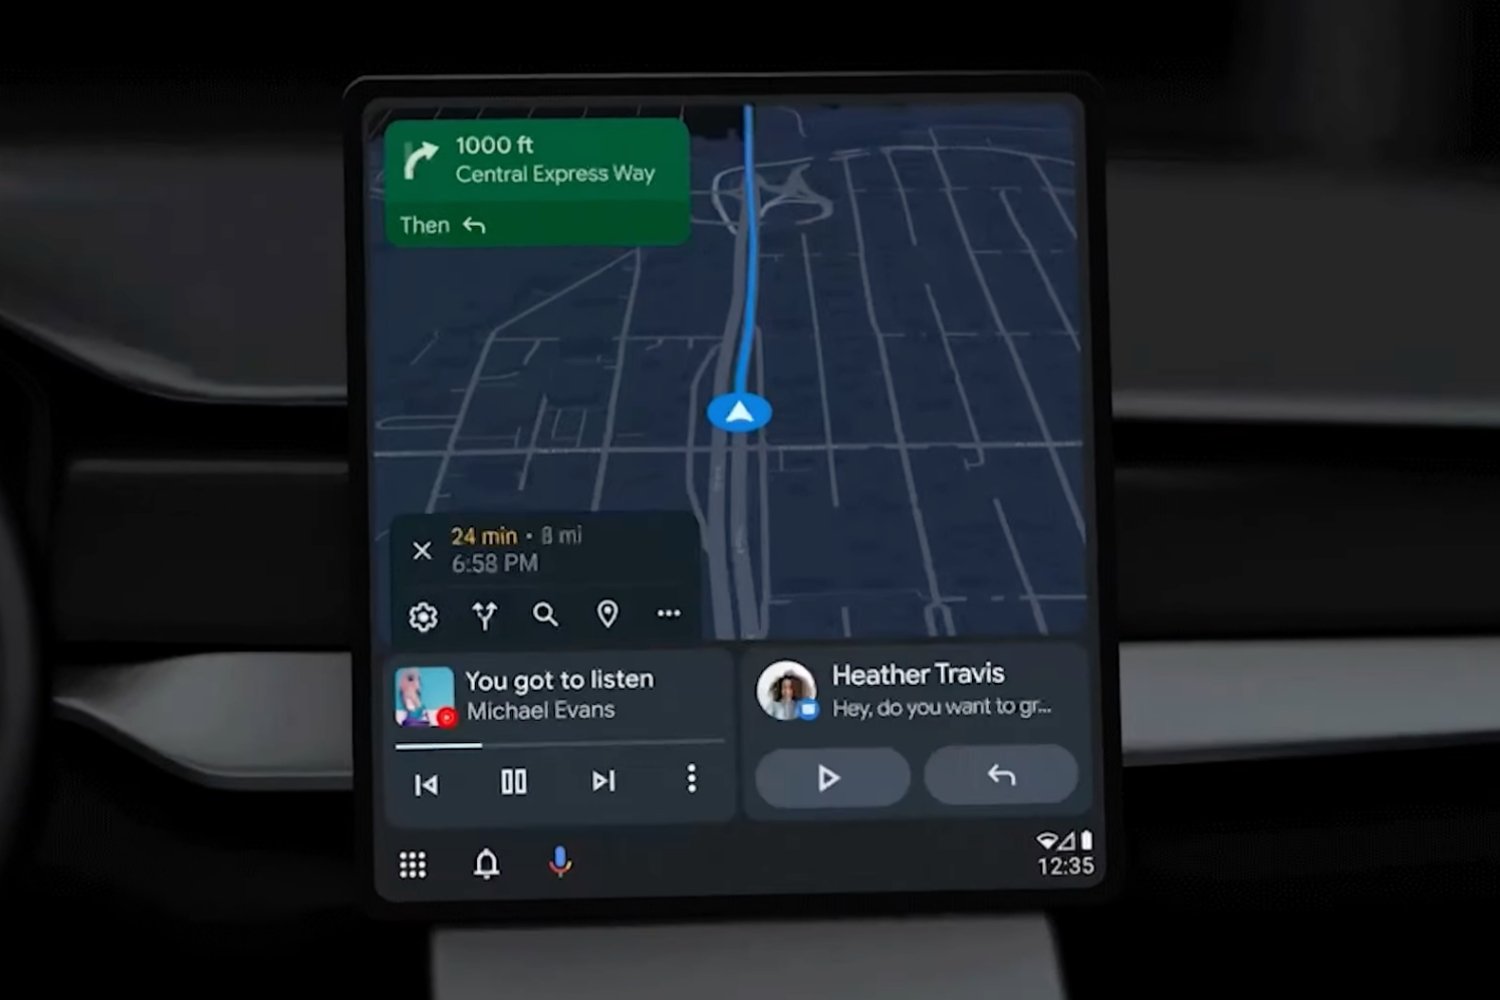 The new Android Auto